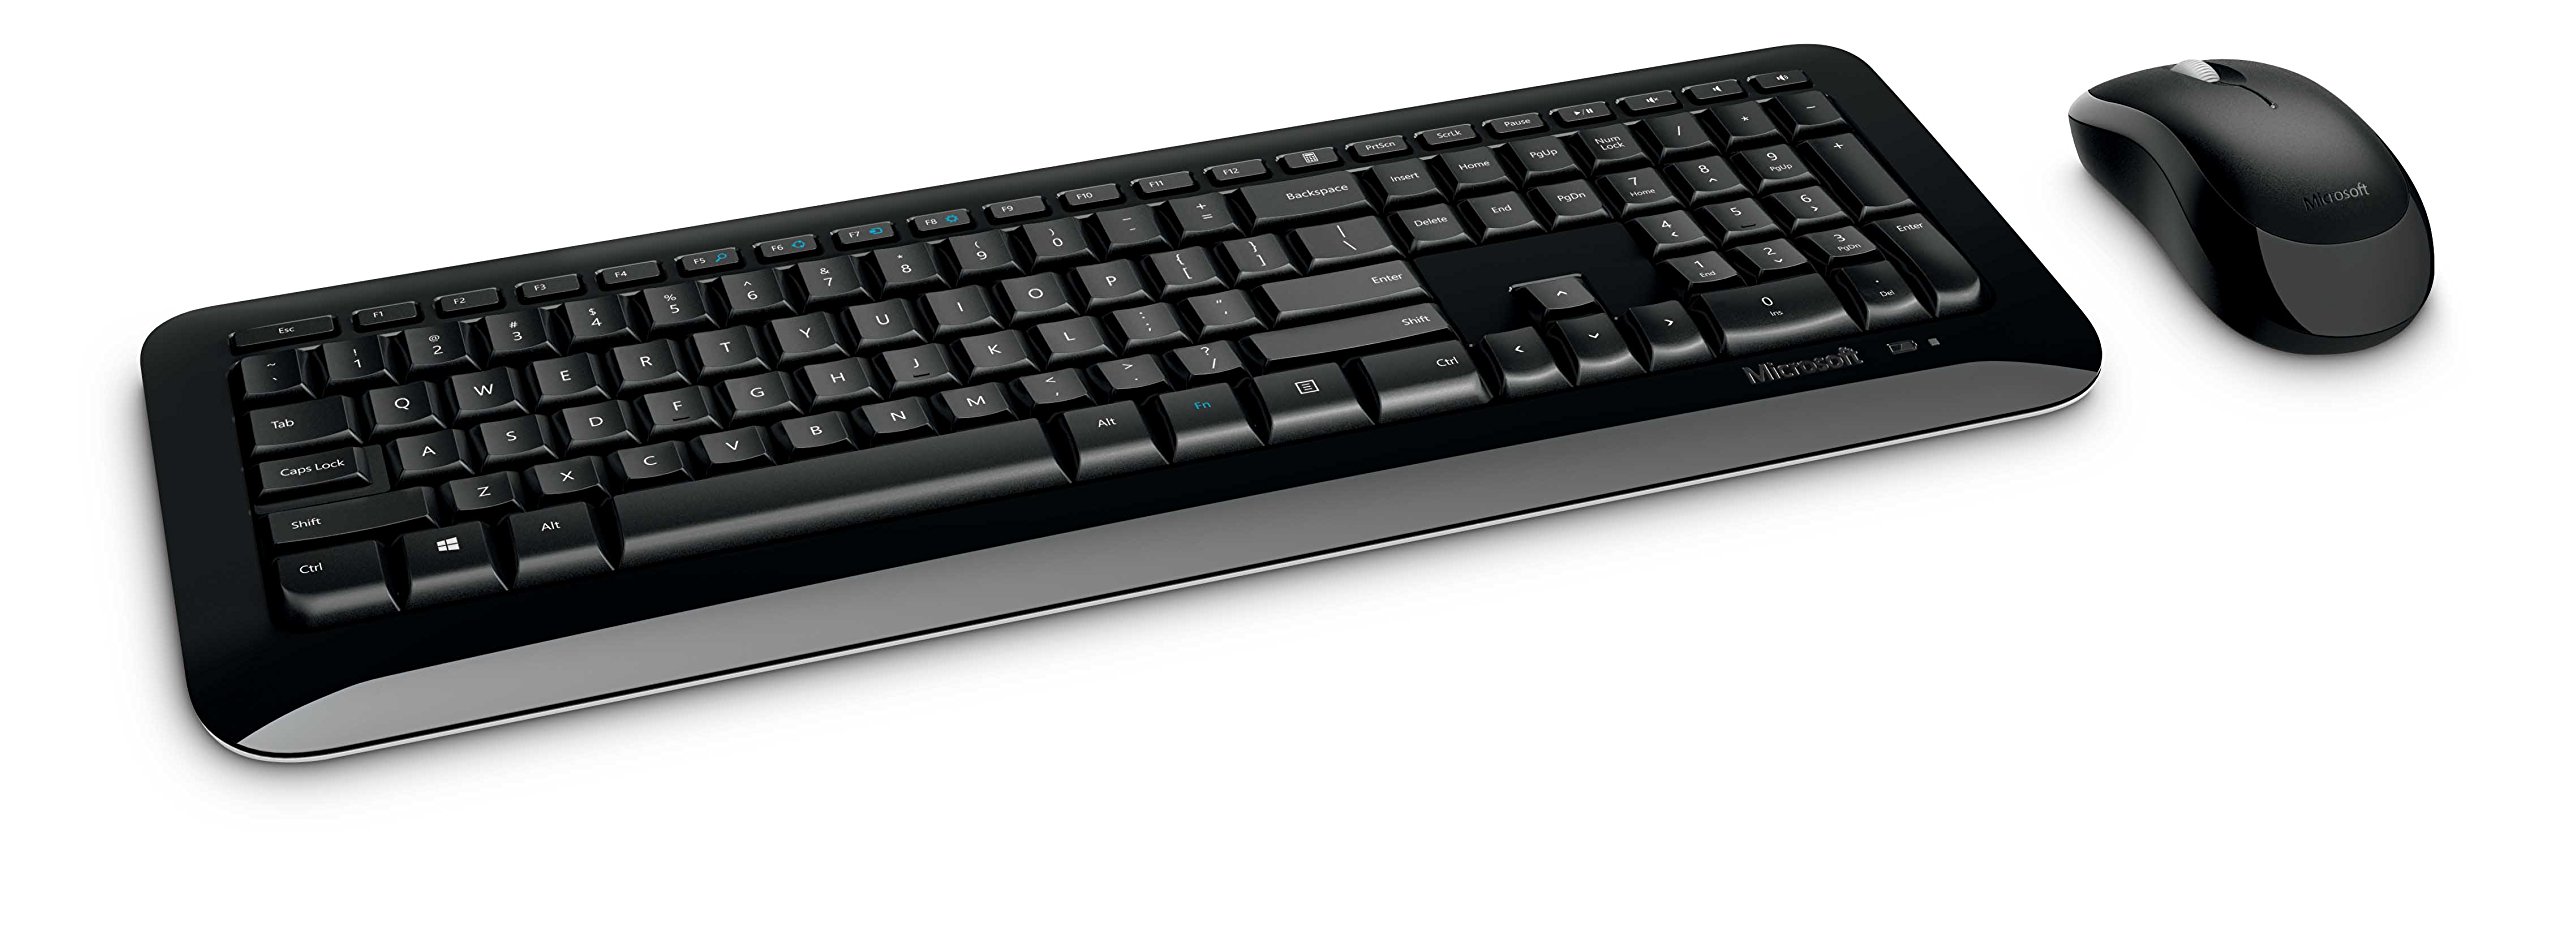 Microsoft Wireless Desktop 850 with AES ) - Black. Wireless Keyboard and Mouse Combo. Snap-In USB Transciever. Right/Left Hand Use Mouse